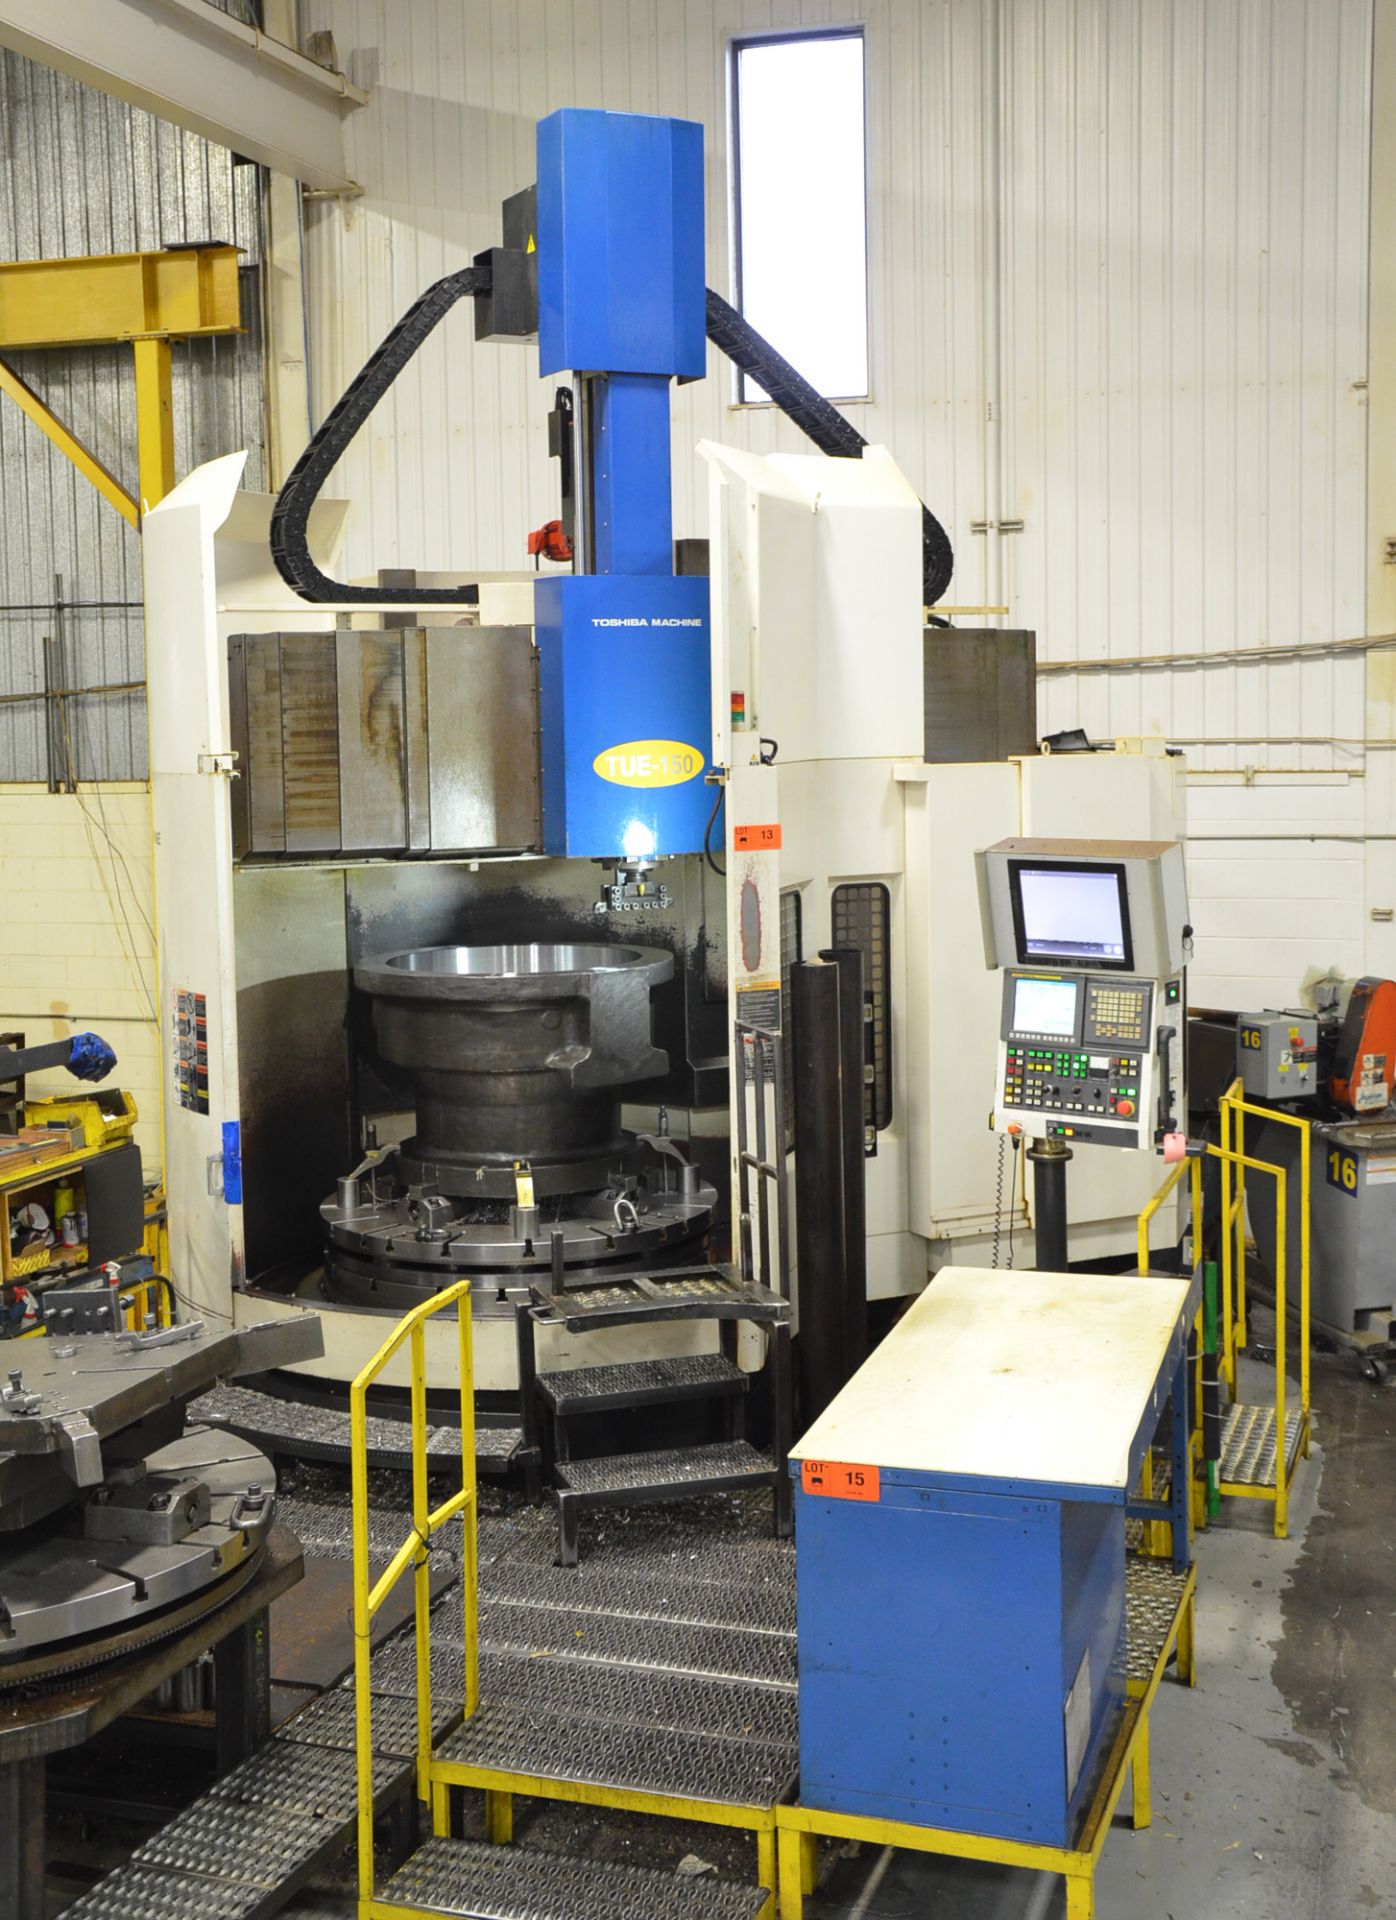 TOSHIBA SHIBAURA (12-2012) TUE-150(S) CNC VERTICAL BORING AND LIVE MILLING CENTER WITH FANUC OI-TD - Image 8 of 37